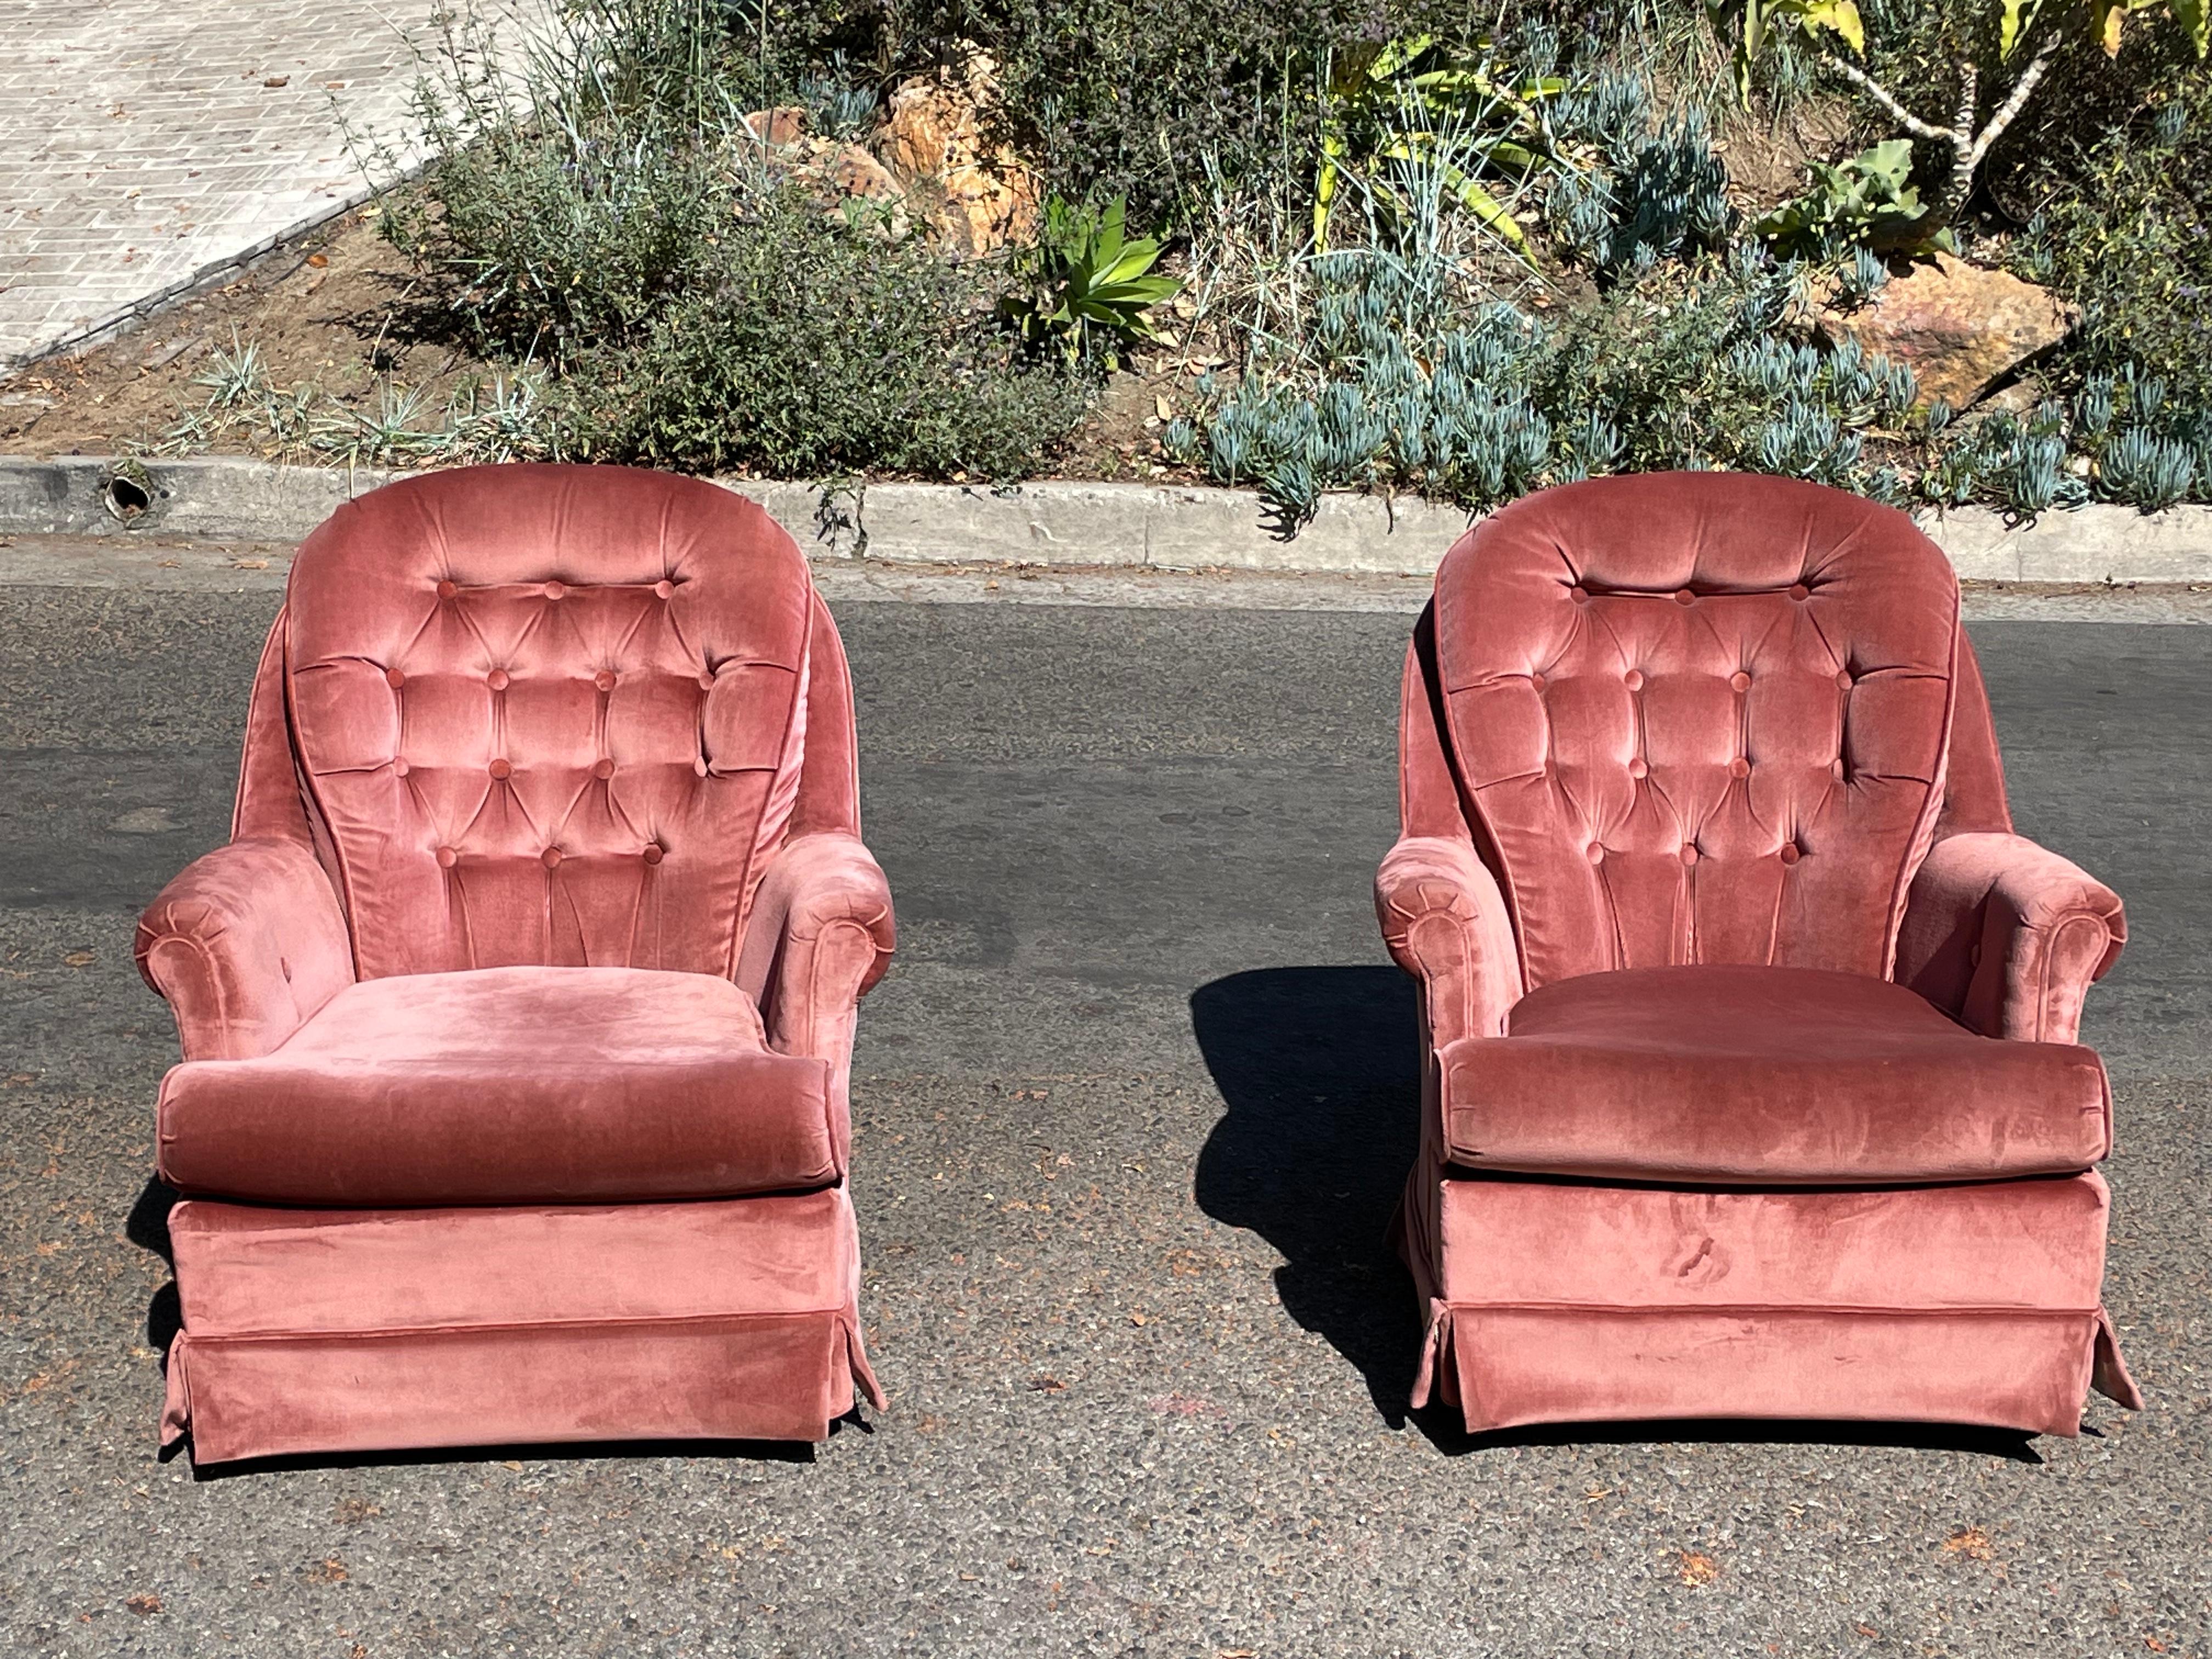 Pair of vintage 1960s classic pink swivel chairs. Gorgeous original velvet. The swivel and rock. Very comfortable.

Glamorous. Original fabric is in excellent condition. They are in near mint condition. Absolutely amazing.

Also includes one